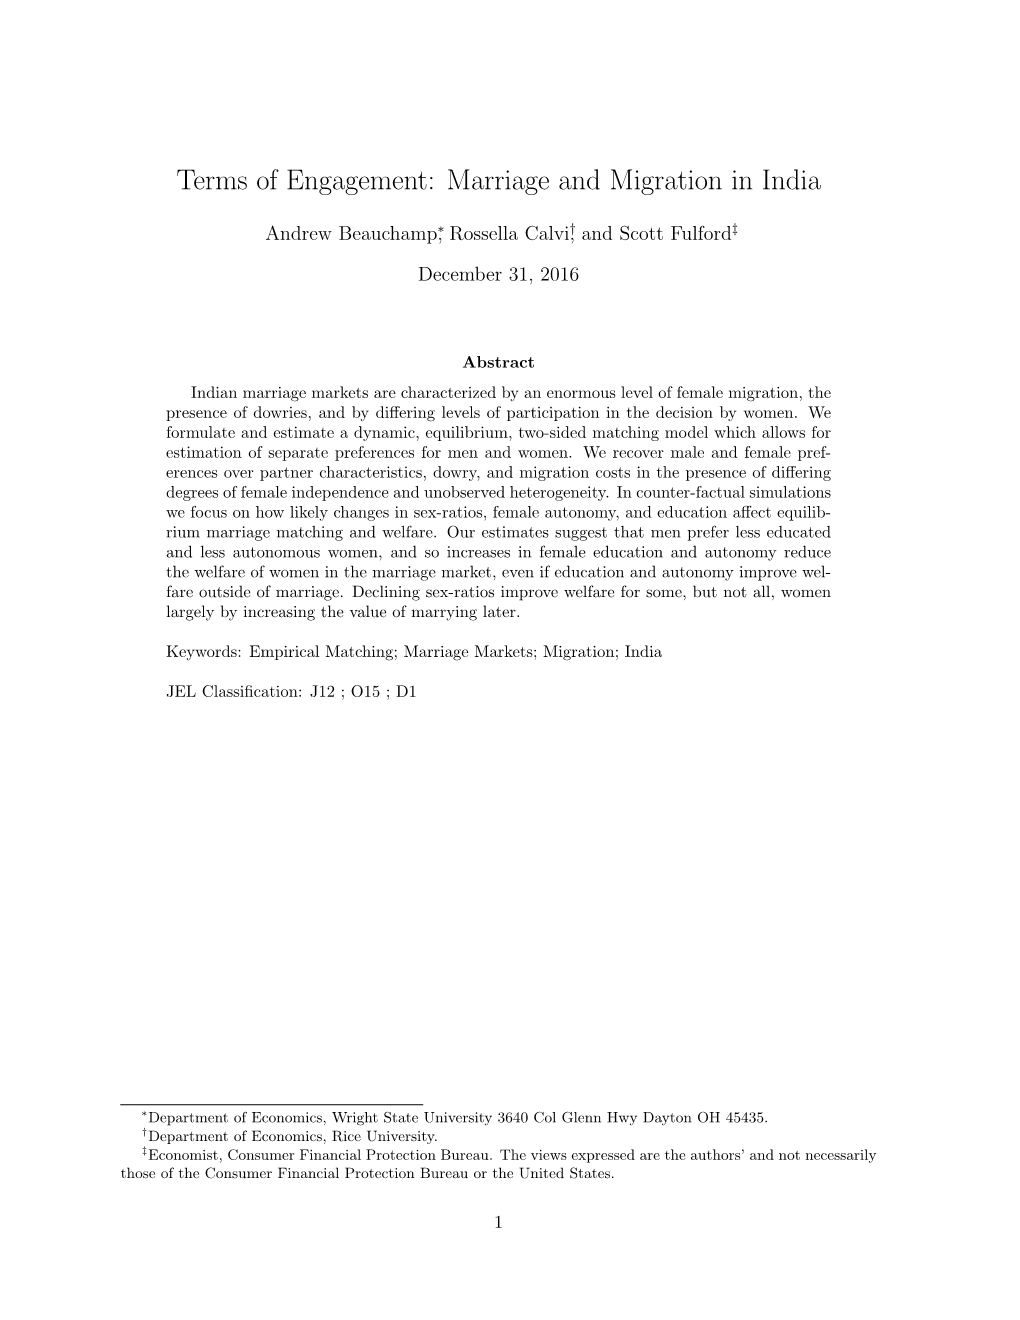 Terms of Engagement: Marriage and Migration in India